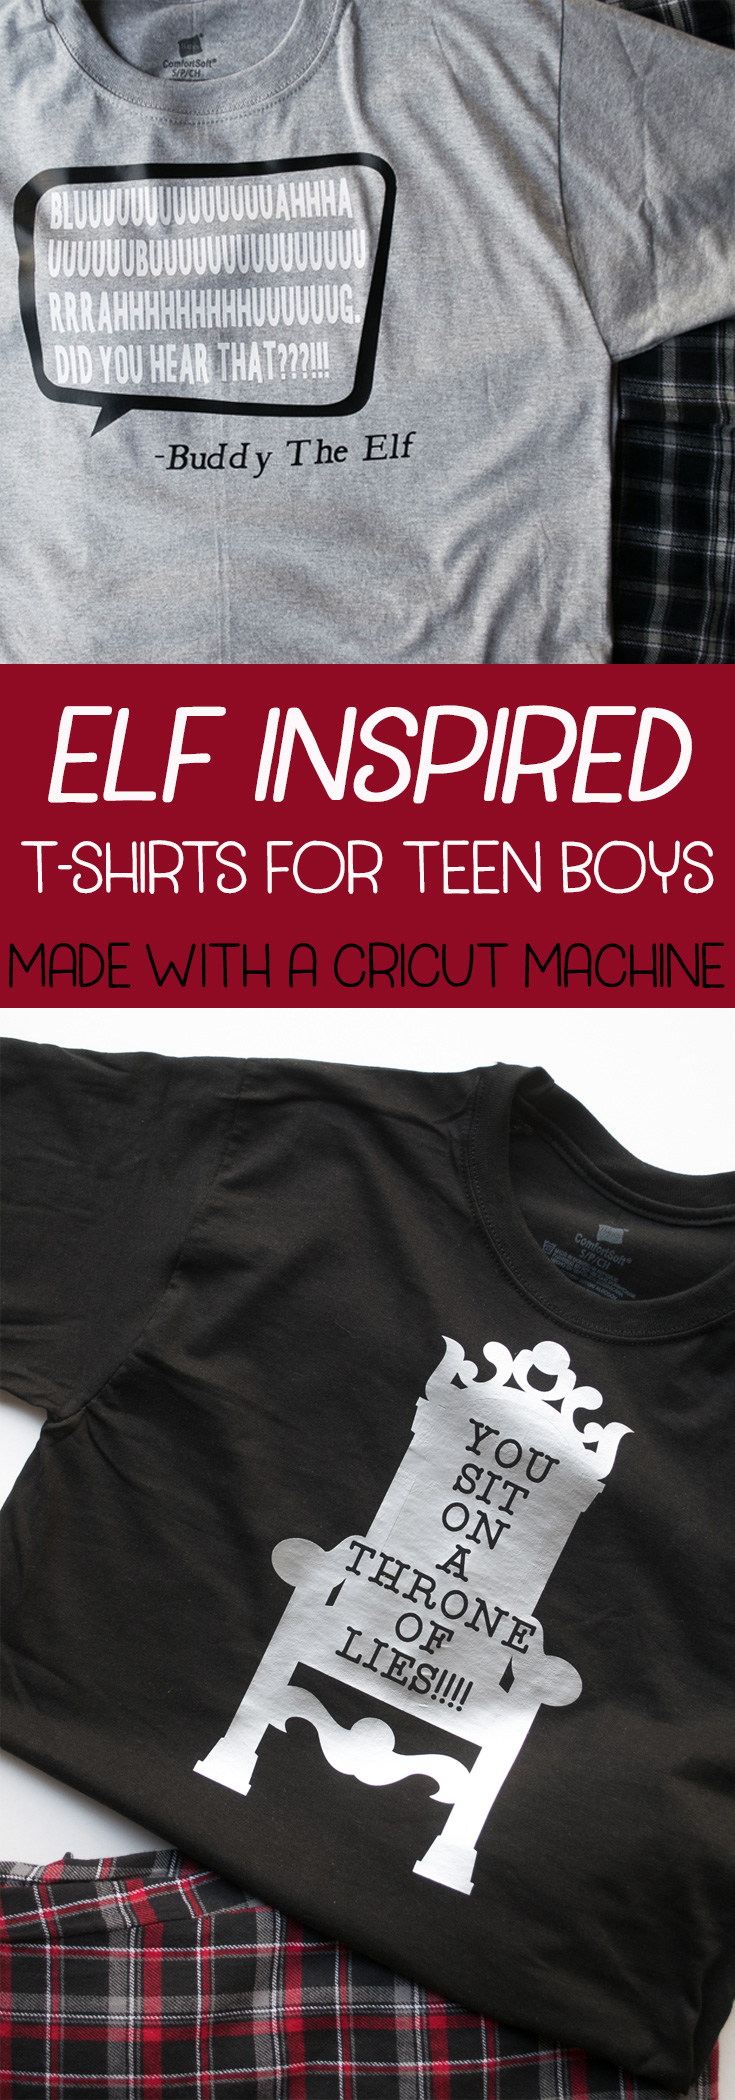 Two of your favorite Elf quotes are turned into easy to recreate iron on vinyl templates for simple DIY holiday tee shirts on your Cricut machine!